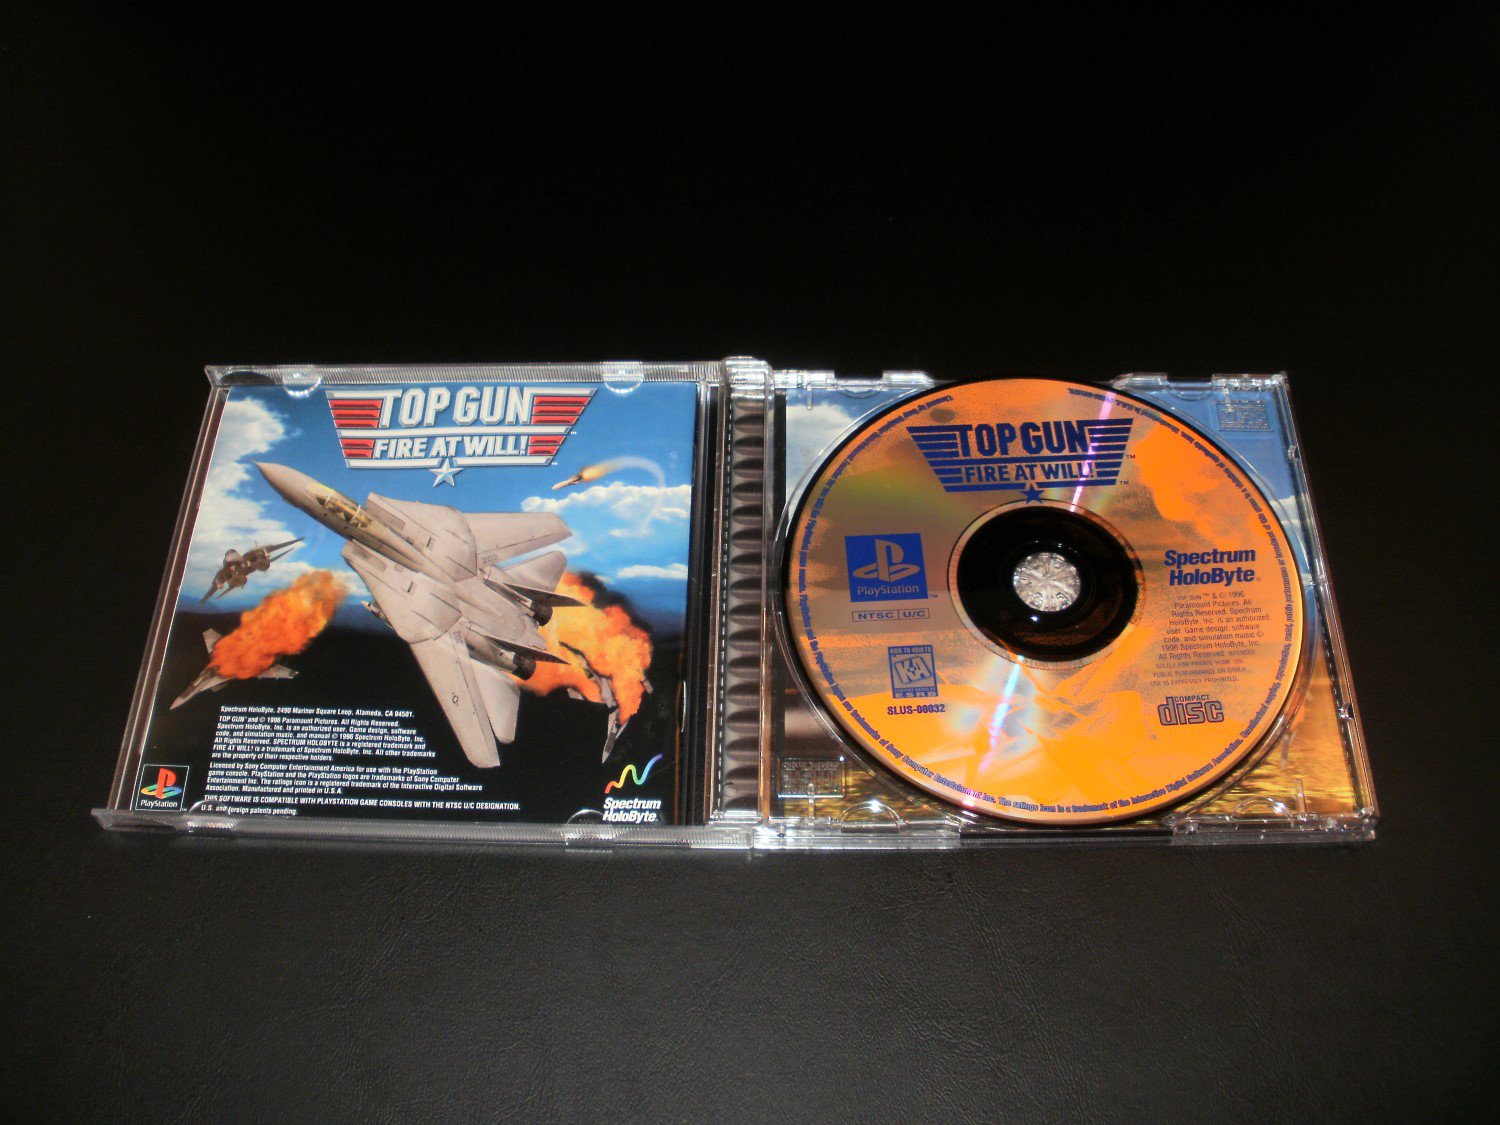 Top Gun Fire at Will - Sony PS1 - Complete CIB